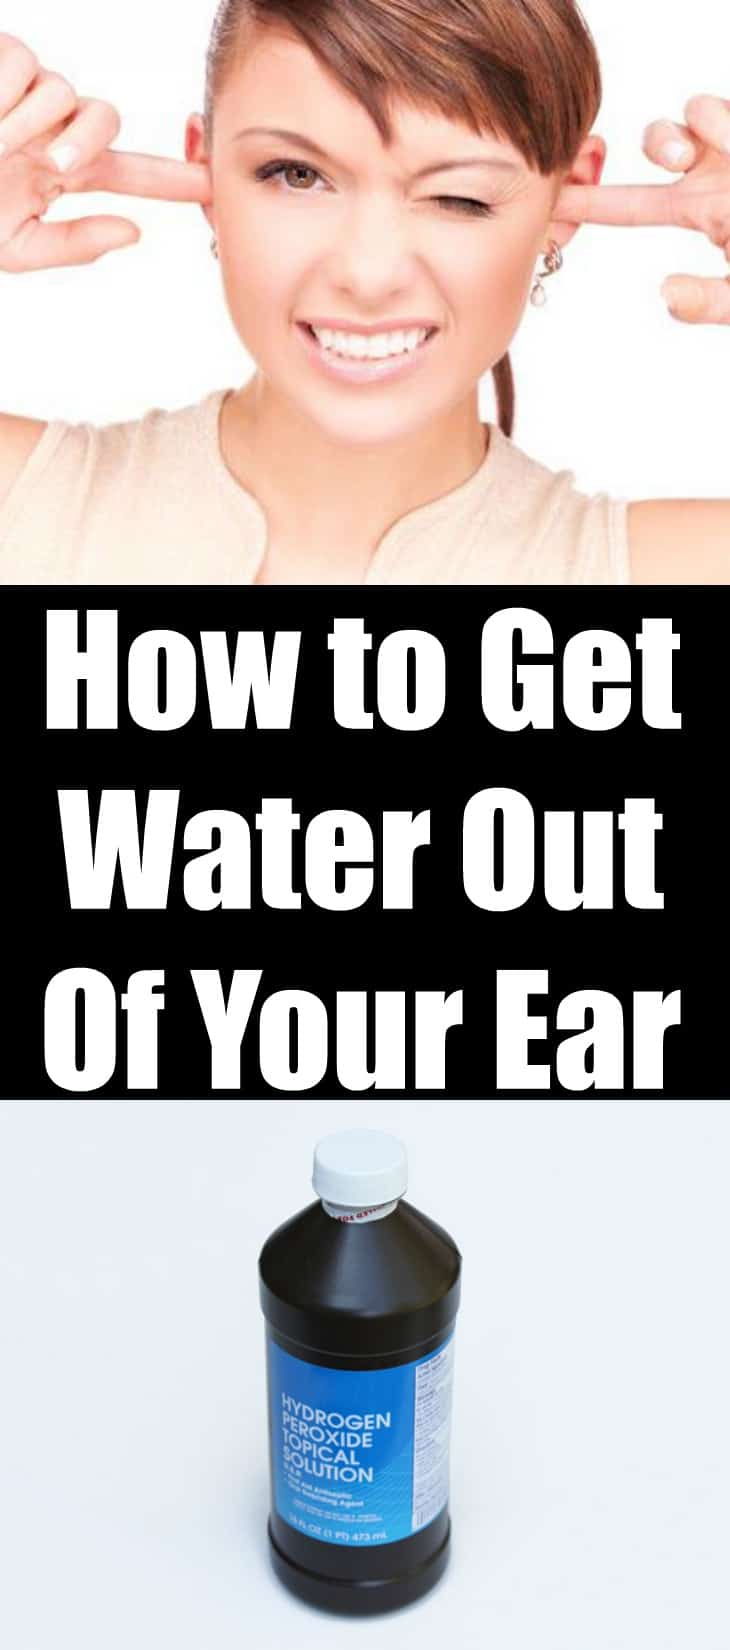 How to Get Water Out Of Your Ear?